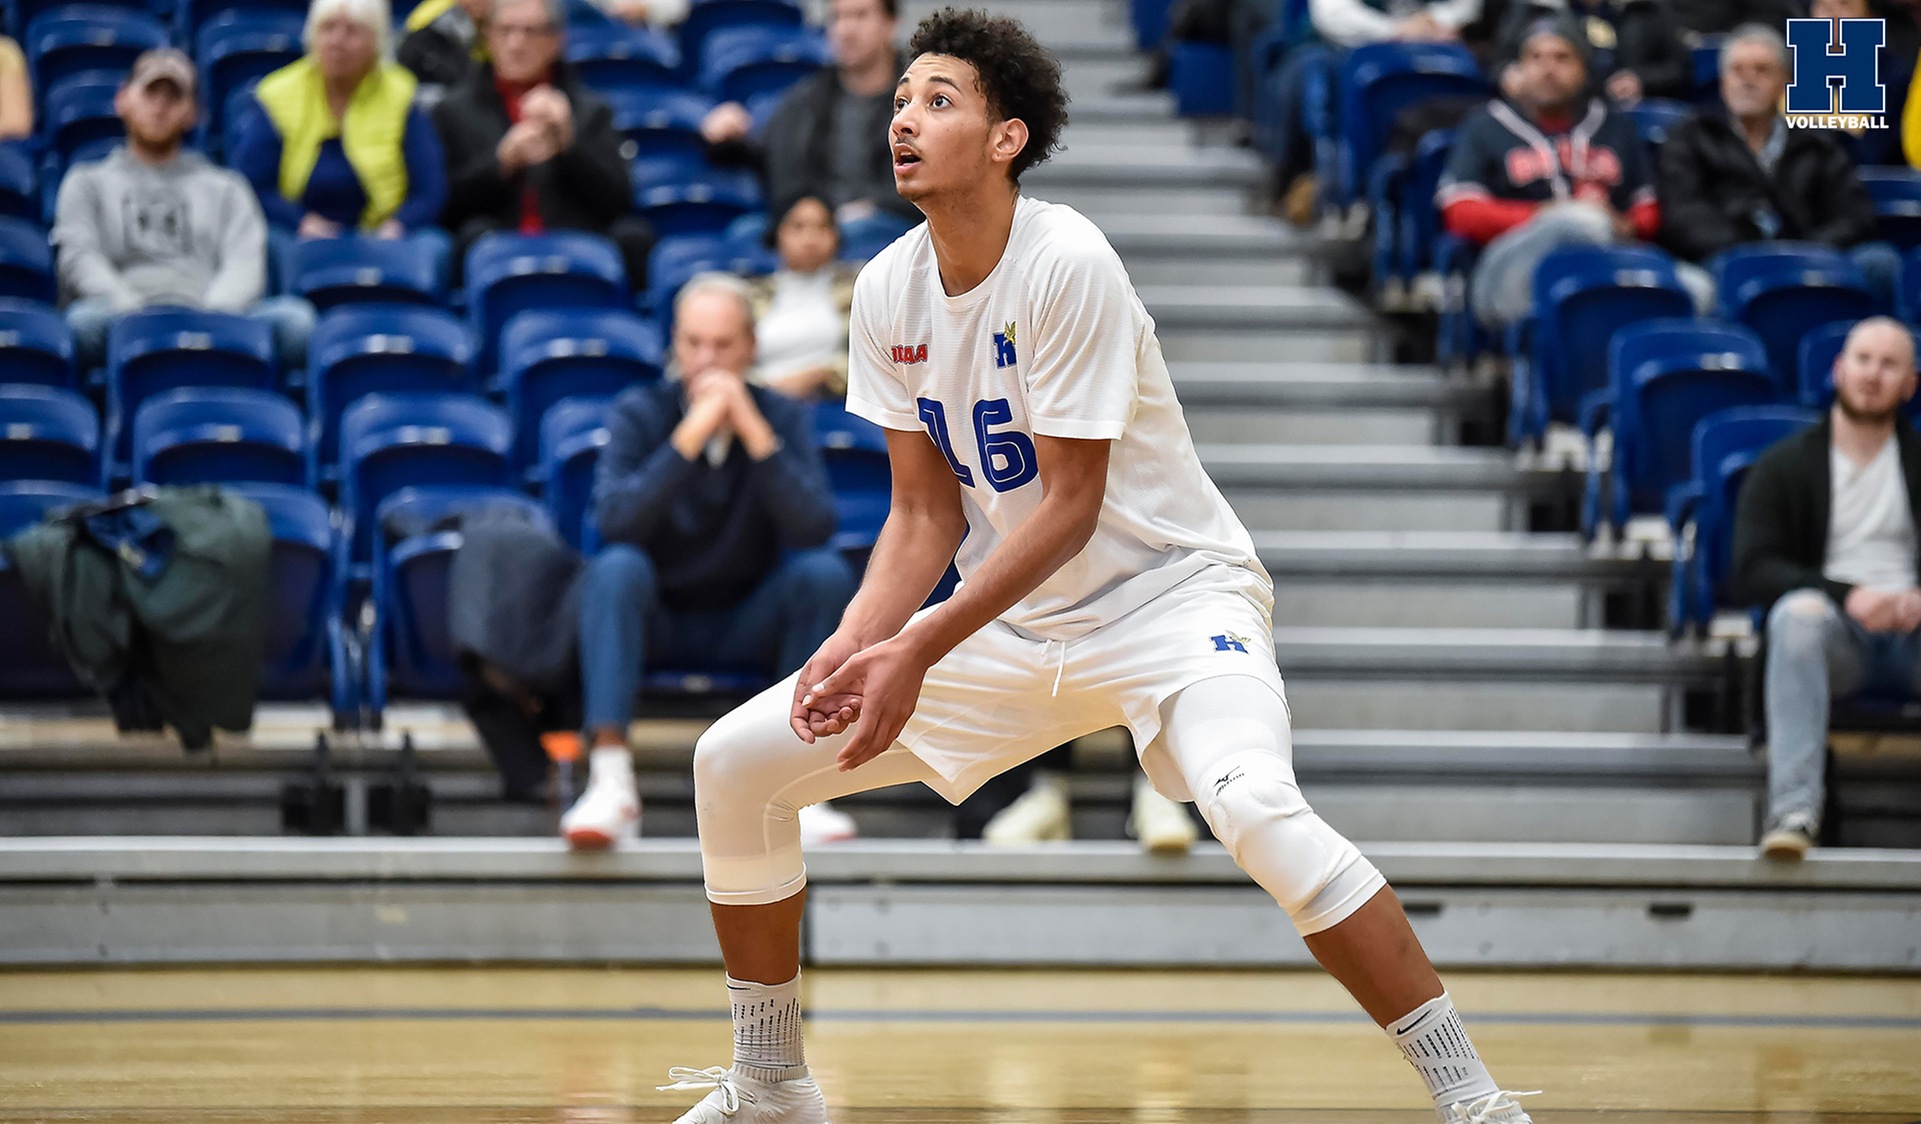 No. 1 Men's Volleyball Rolls By Cambrian, 3-0